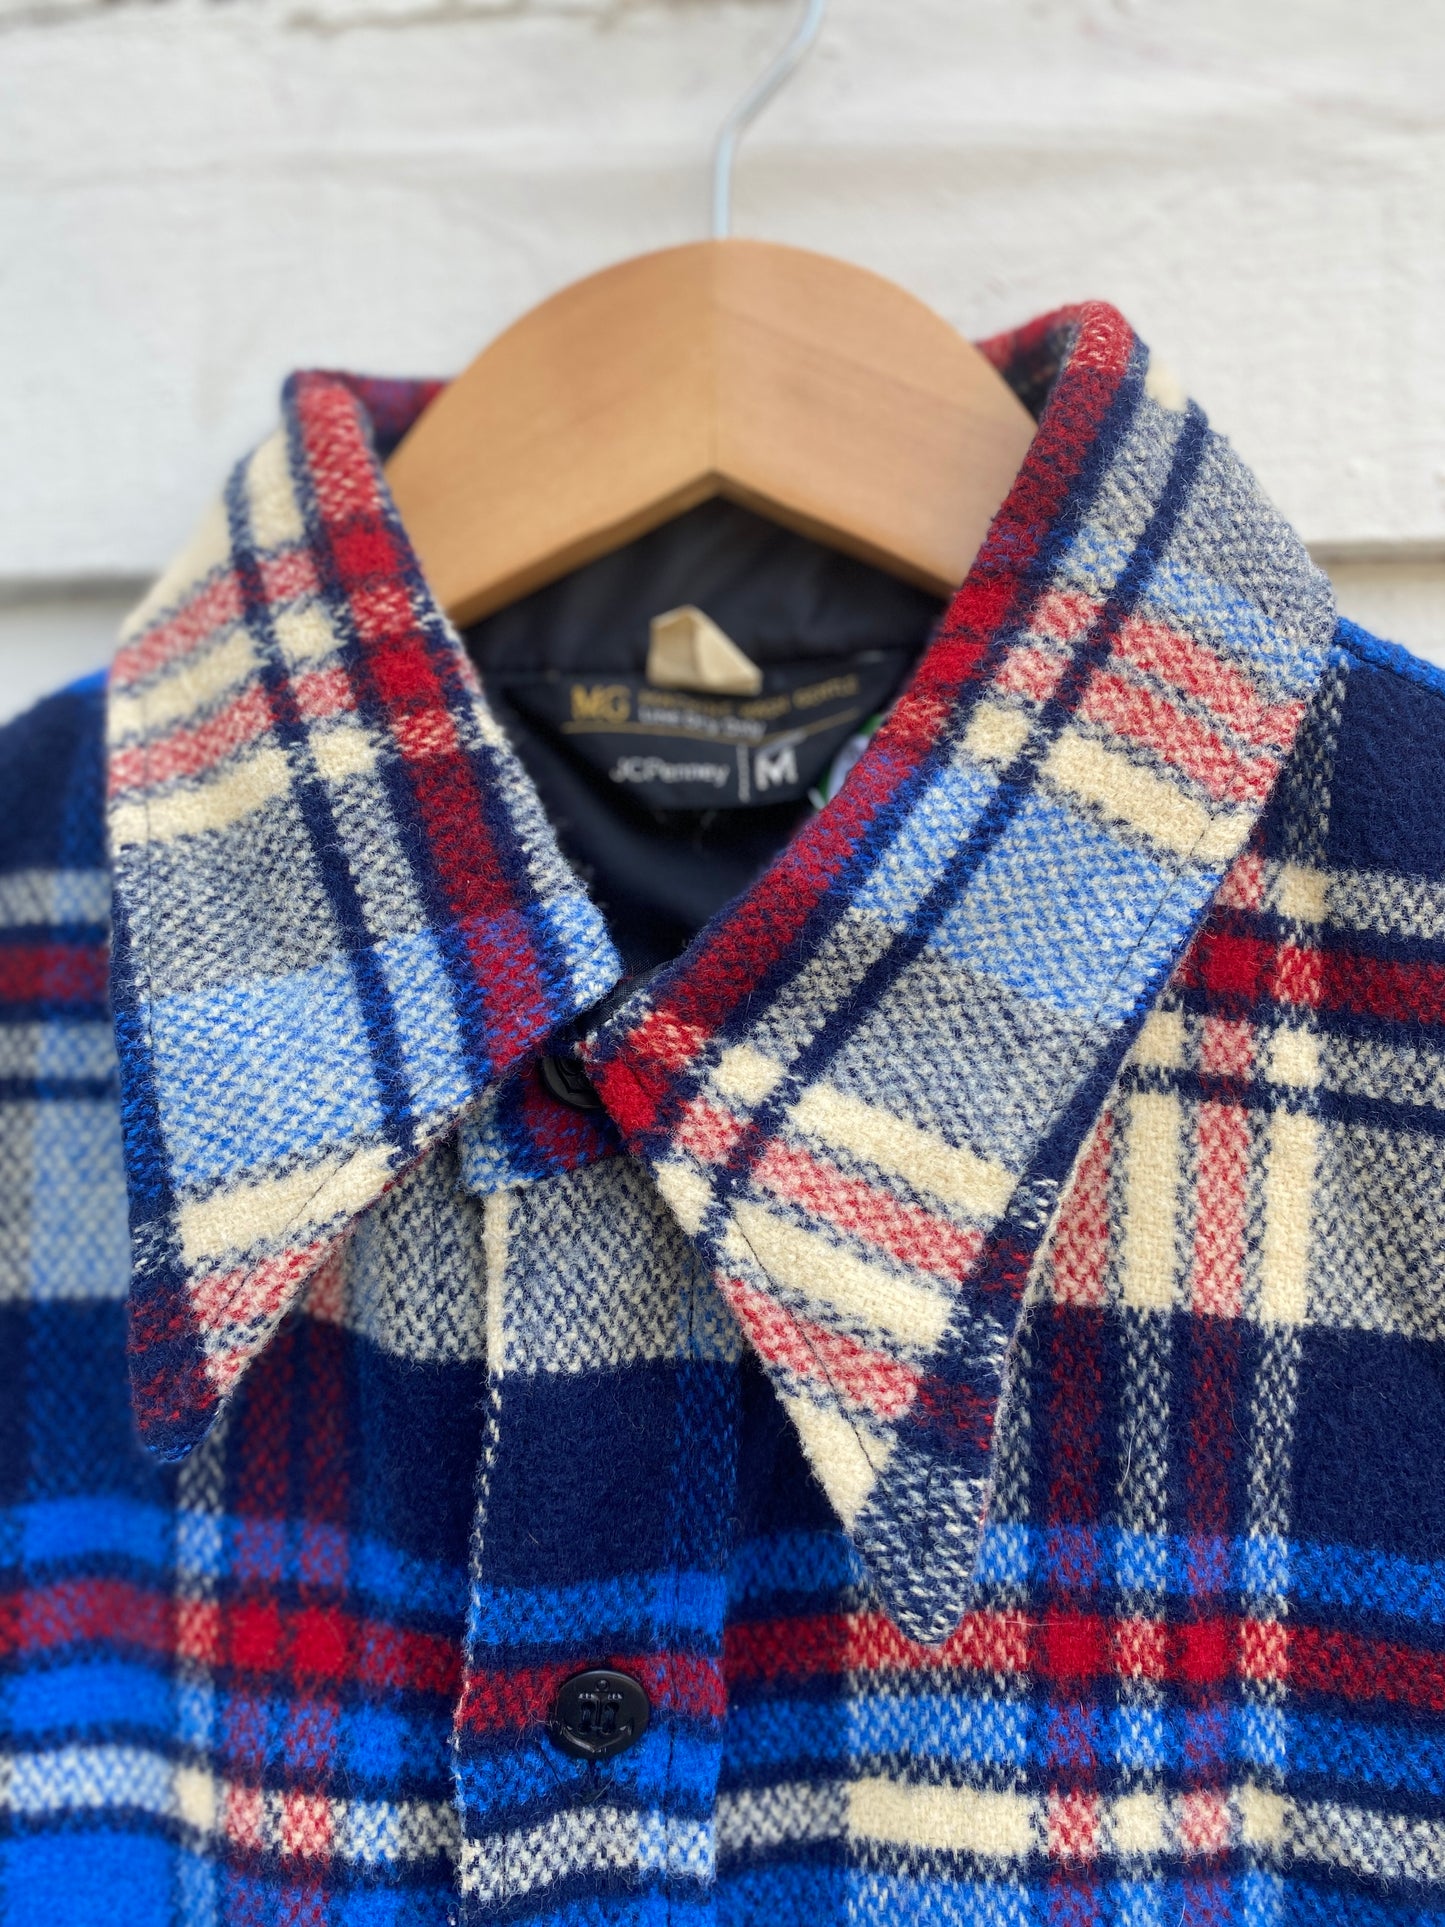 Vintage blue red and white flannel medium